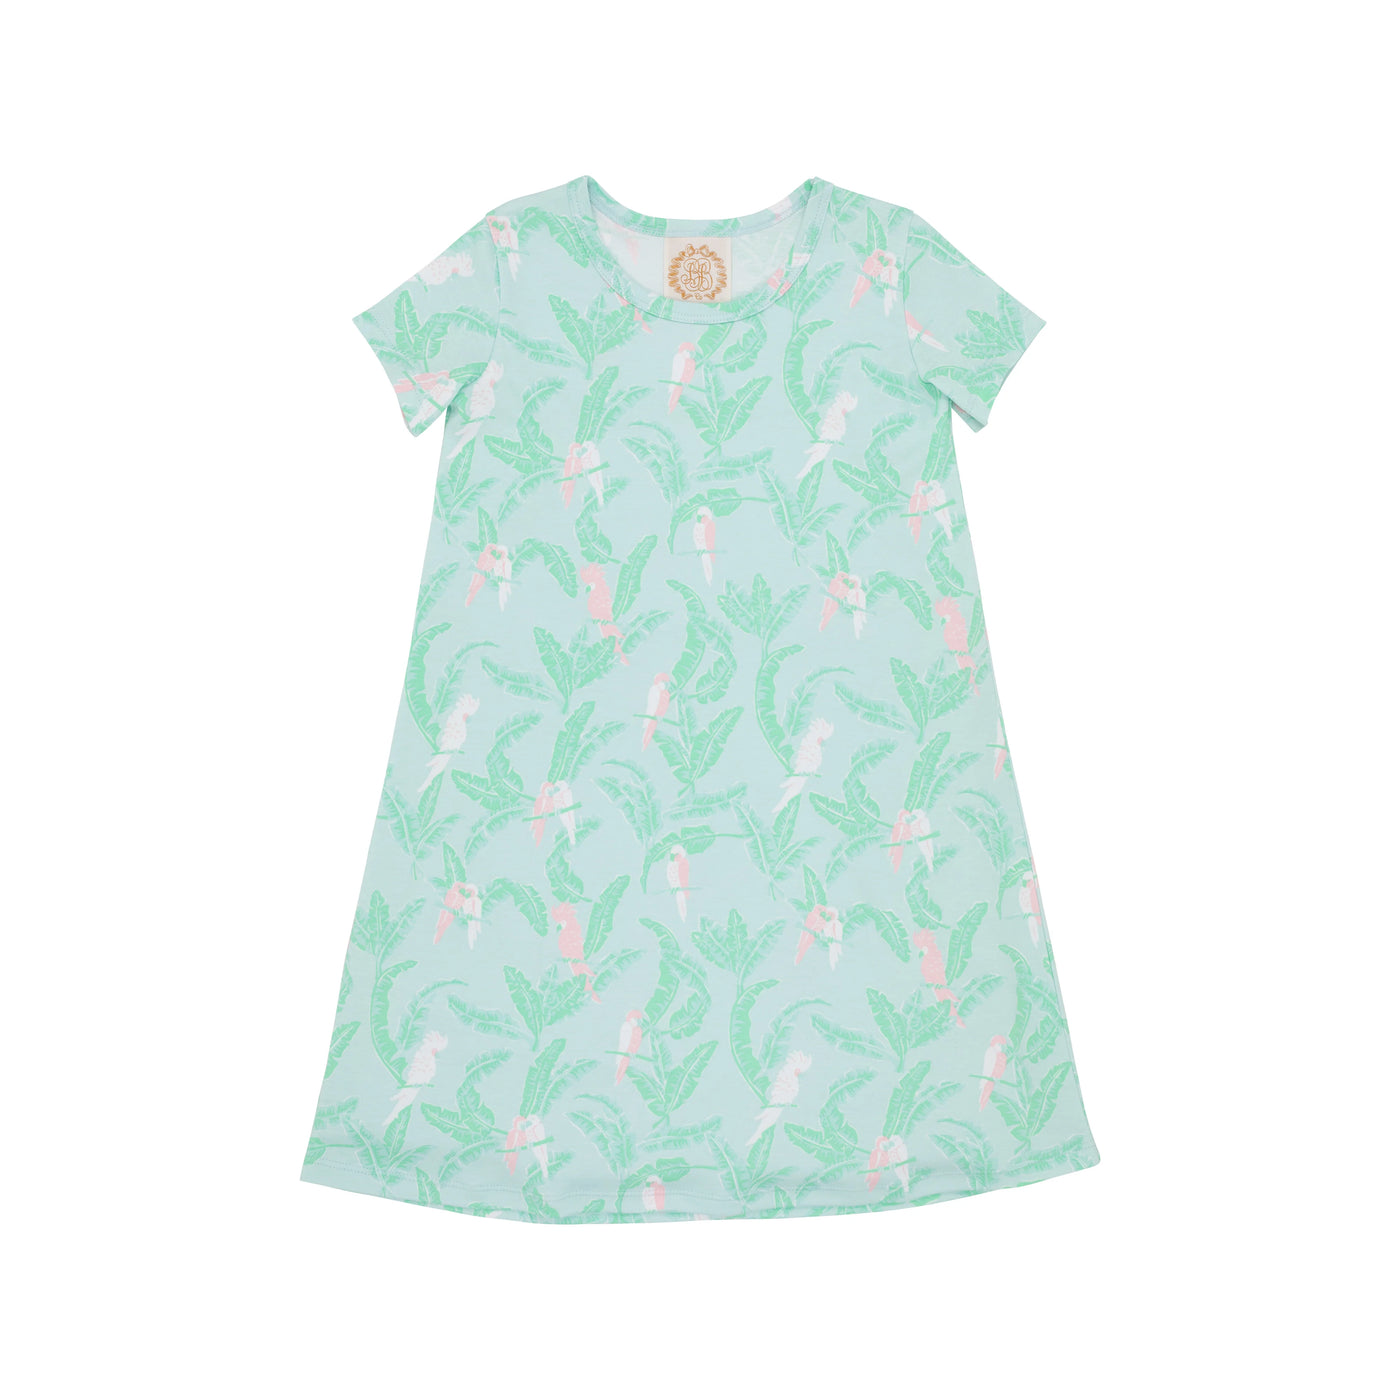 Parrot Island Palms Polly Play Dress